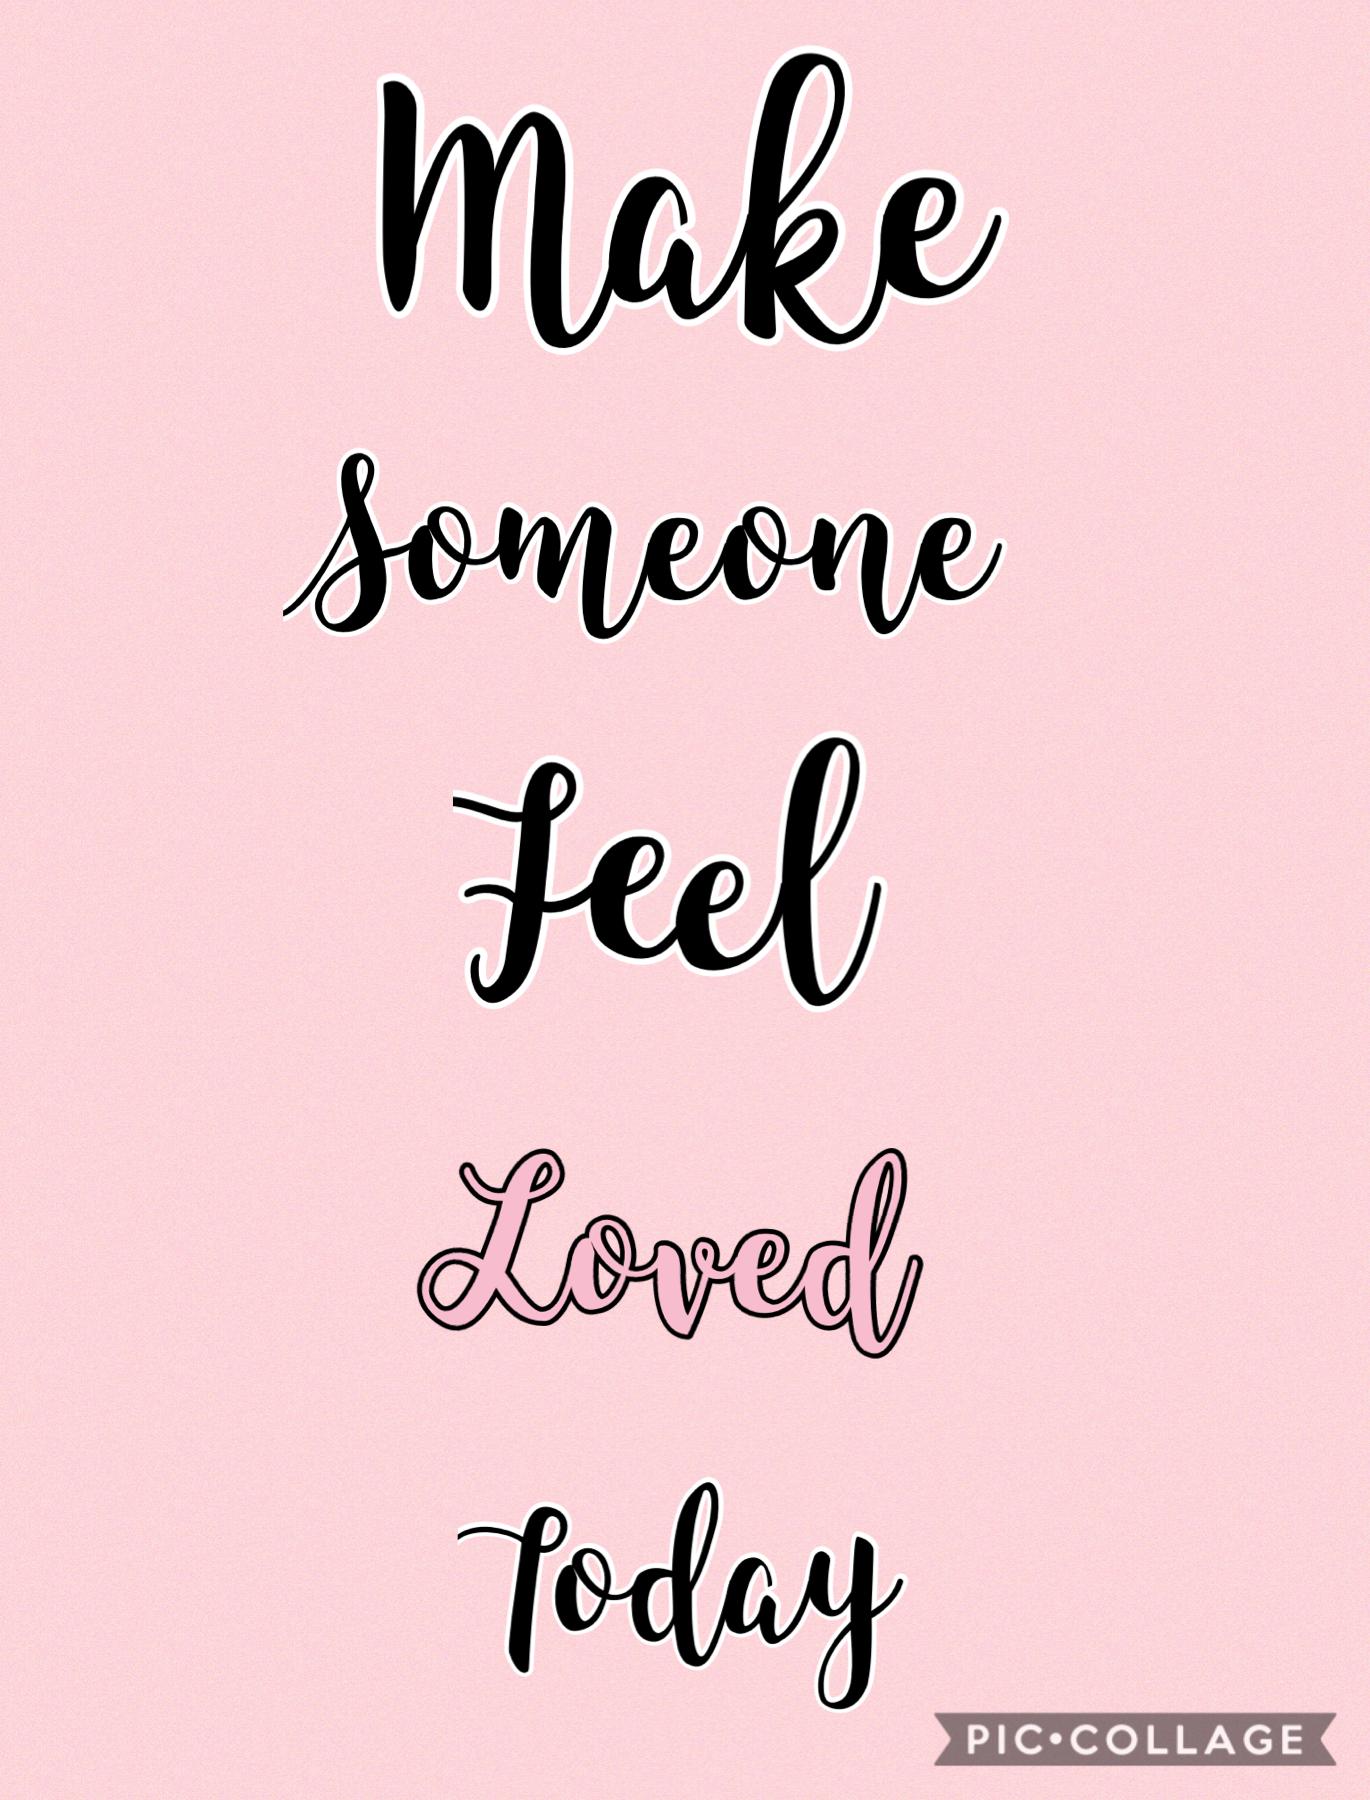 Make someone feel loved today!